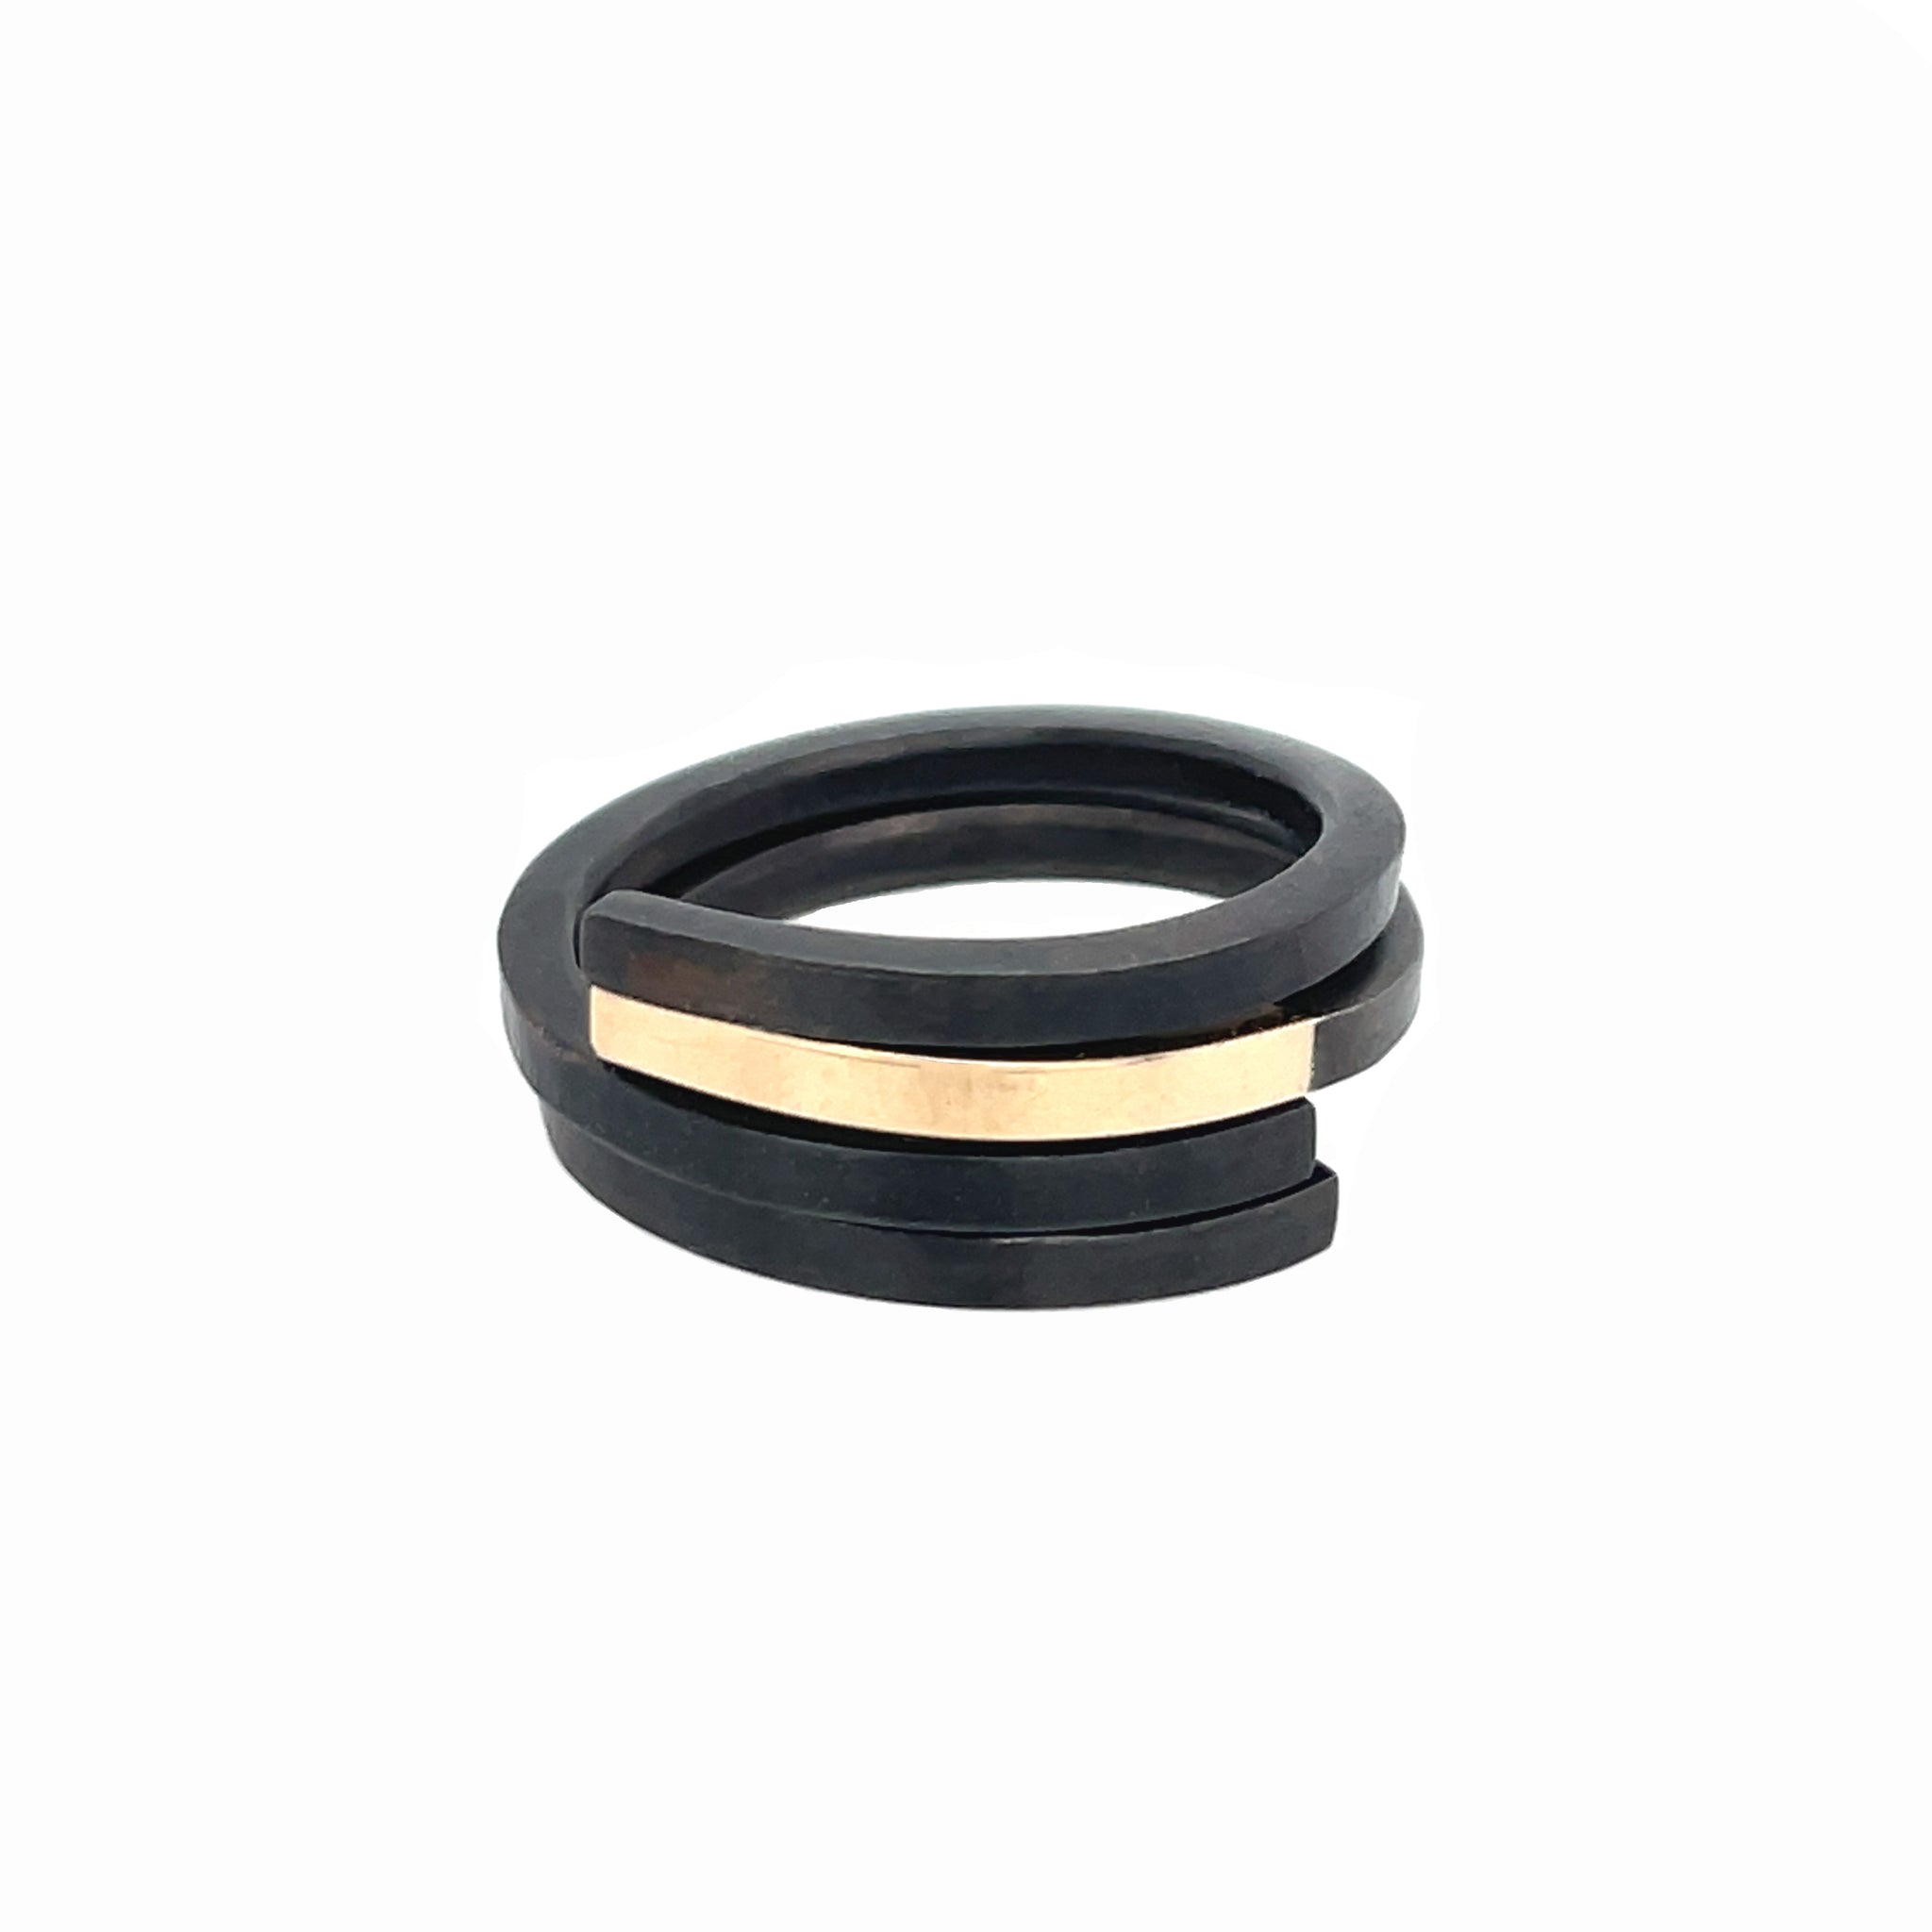 Nesting Wrap Ring in Black Silver and 14K Gold